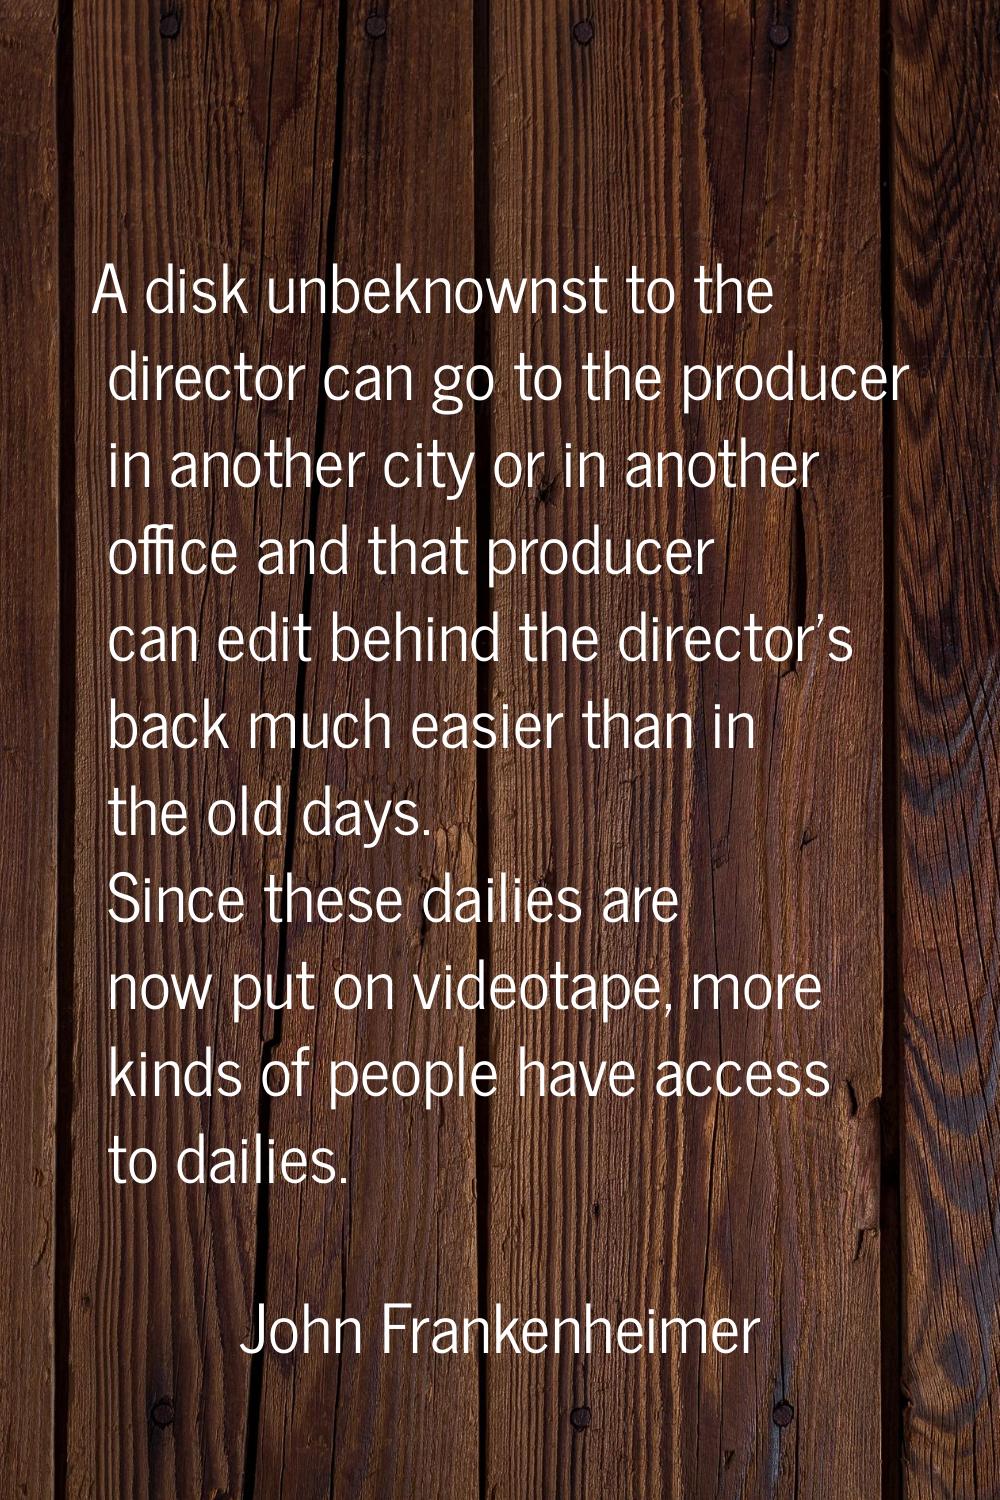 A disk unbeknownst to the director can go to the producer in another city or in another office and 